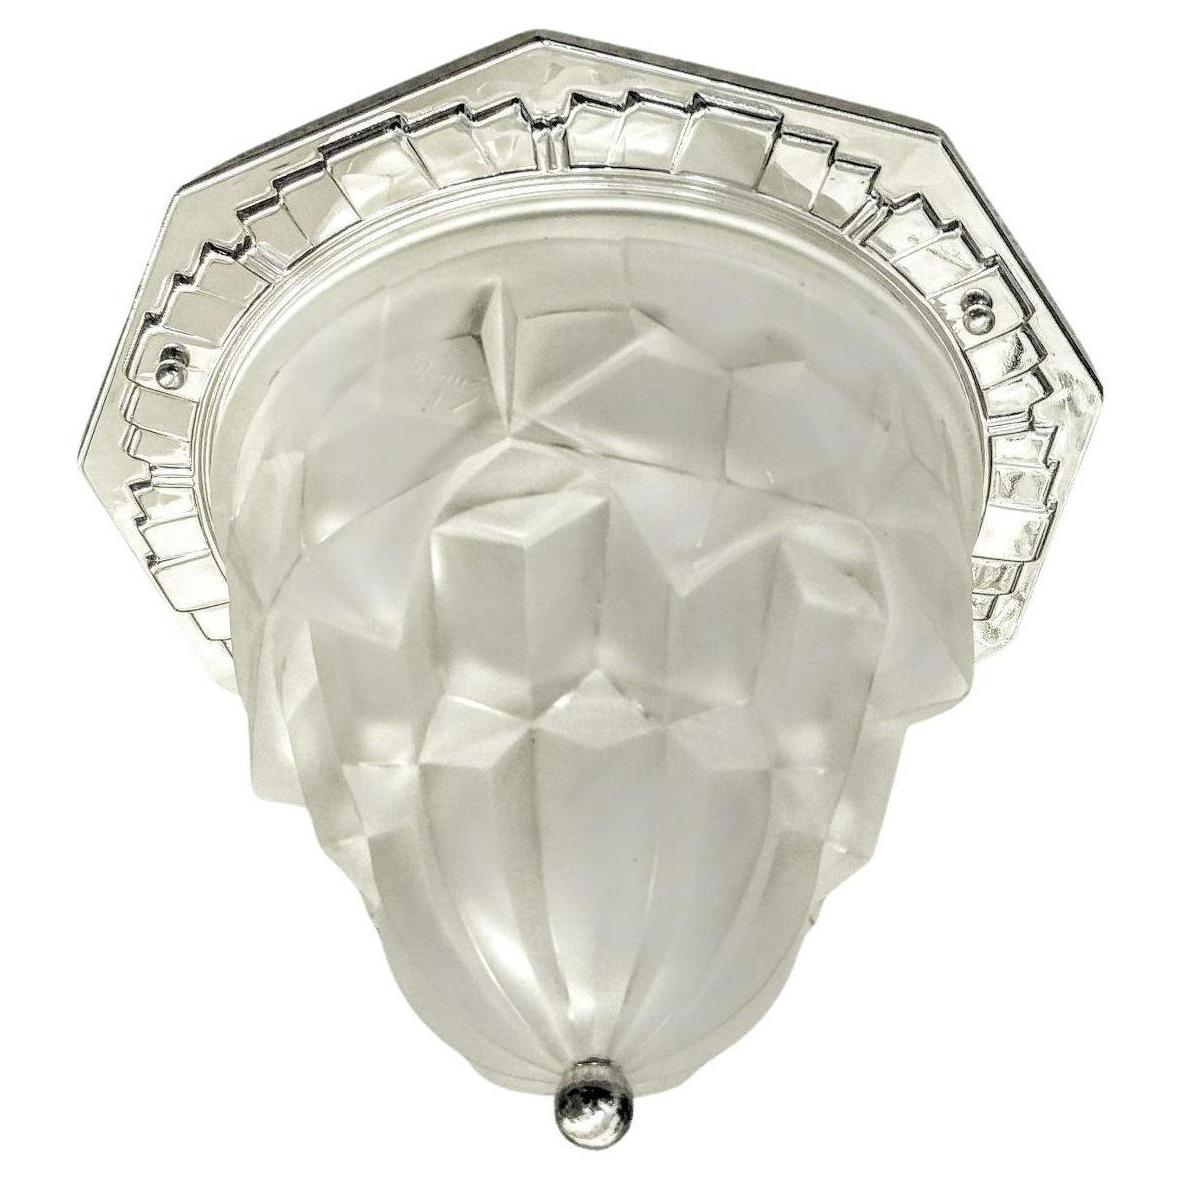 A French Art Deco flush mount glass shade with a matching frame by the French artist 